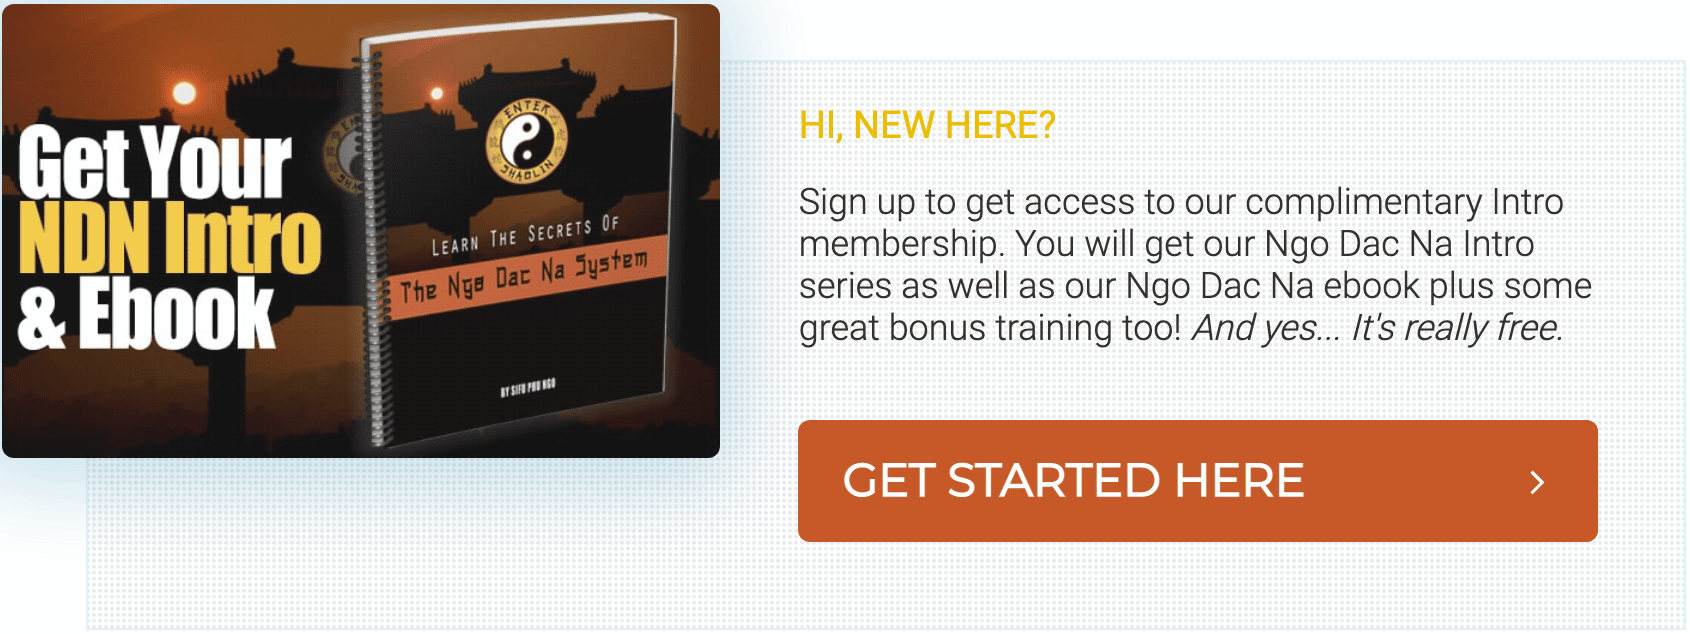 NOT A MEMBER YET? GET ACCESS TO OUR COMPLIMENTARY INTRO TRAINING HERE.